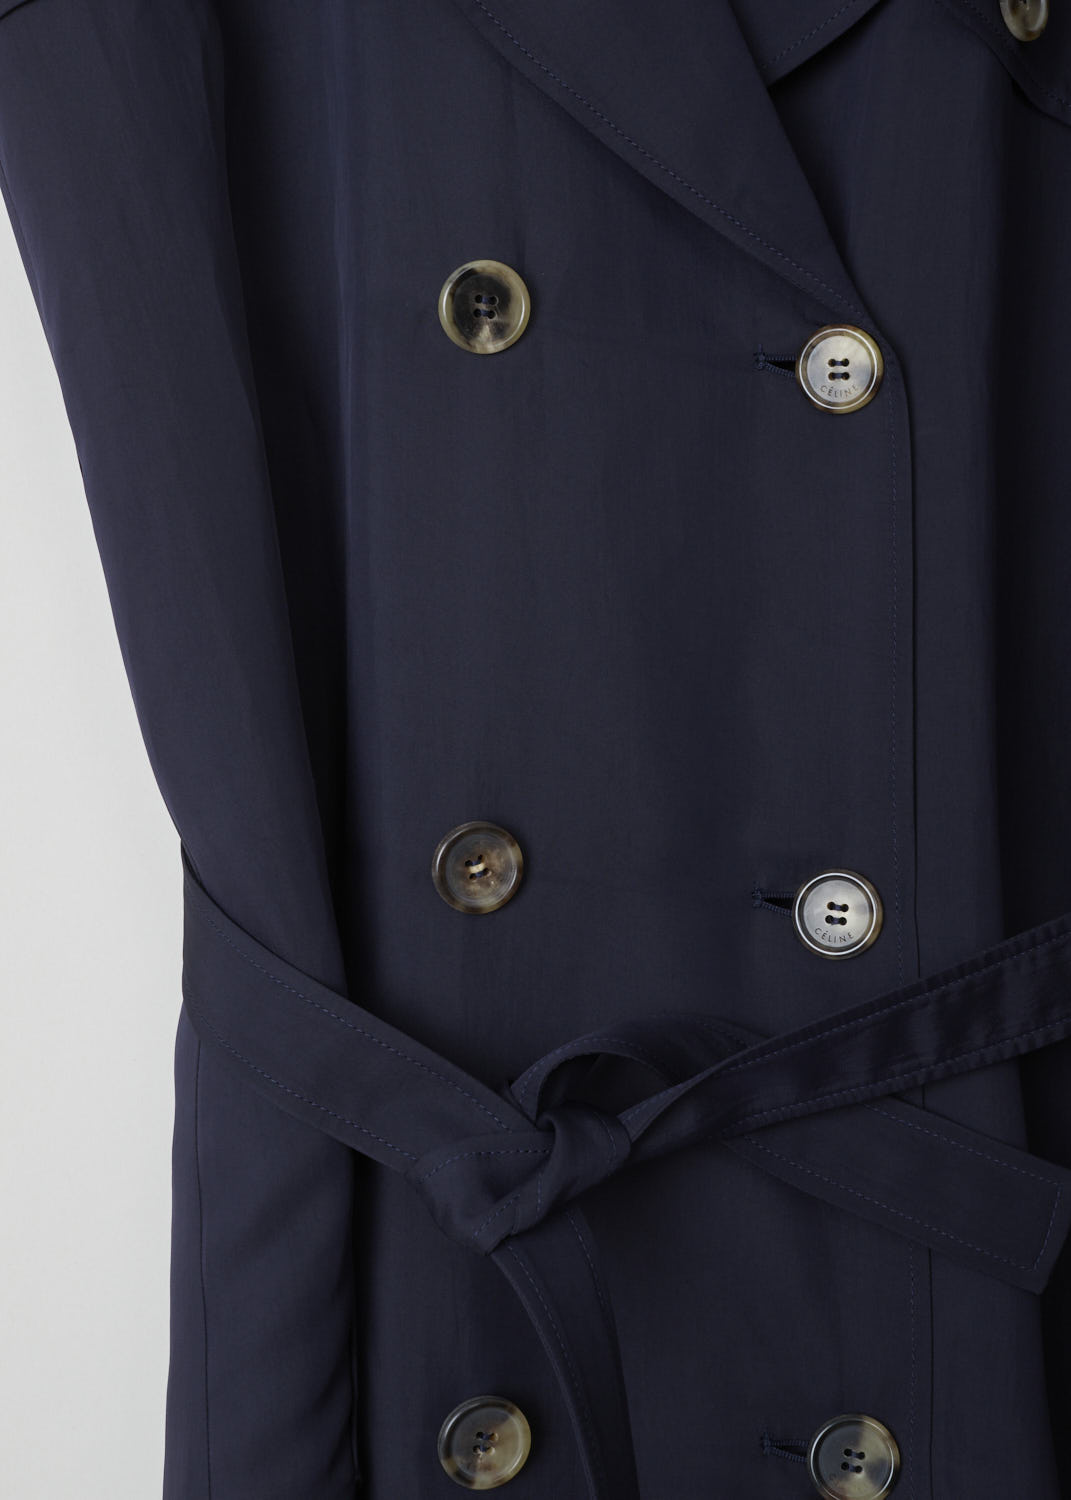 CÉLINE, MIDNIGHT BLUE RAINCOAT, 6464_28U36_0MI_C01, Blue, Detail, Elegant midnight blue trench coat. The coat has a notched lapel and classic details such as epaulets and storm flaps. Two rows of buttons form the closing option. The coat comes with a matching belt to cinch in the waist. The long sleeves have sleeve straps on the cuffs. A slanted pocket can be found on either side. In the back, the coat has a centre slit.